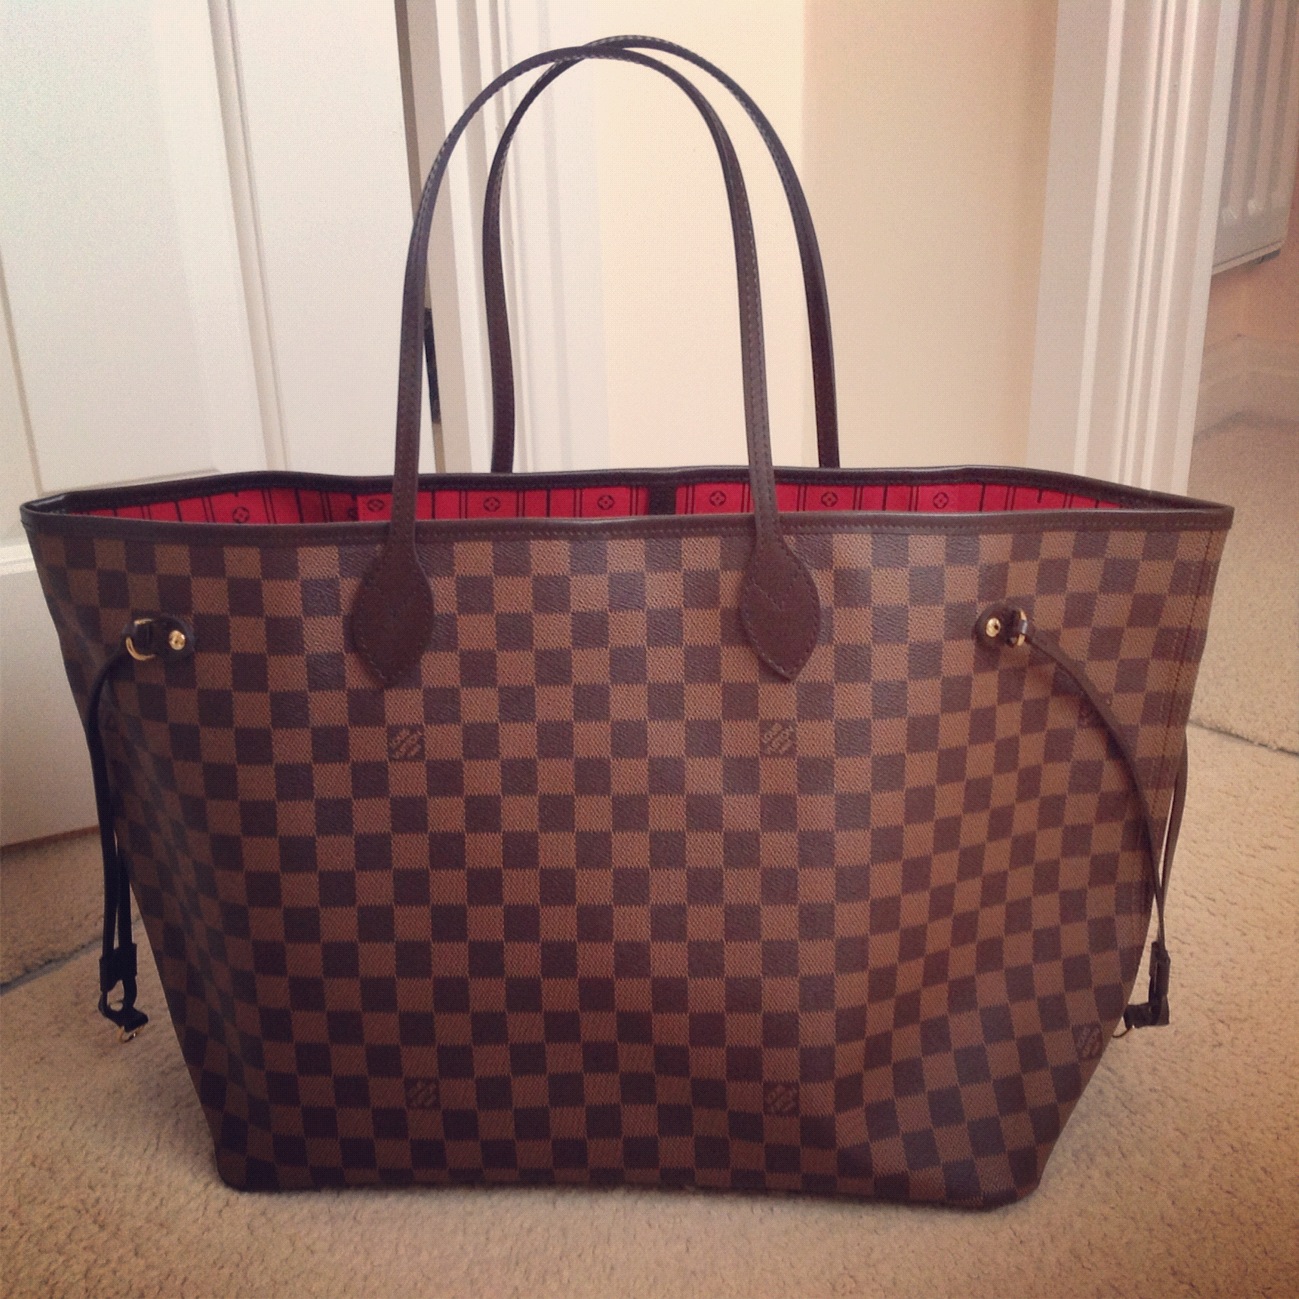 Louis Vuitton Neverfull GM in Damier Azur! What took me so long